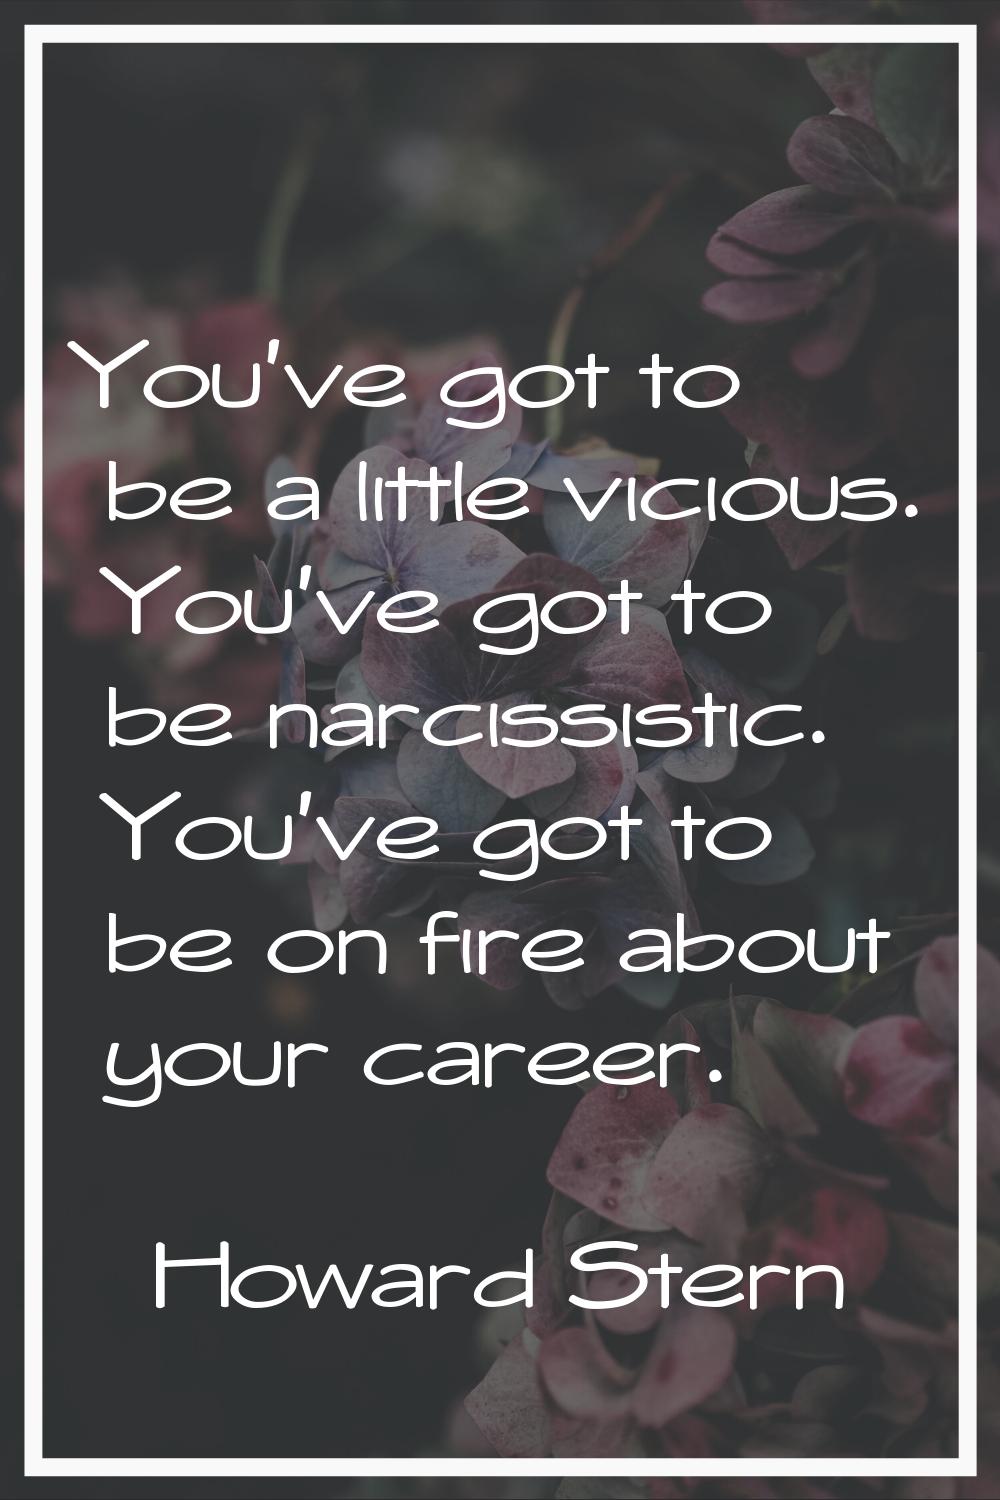 You've got to be a little vicious. You've got to be narcissistic. You've got to be on fire about yo